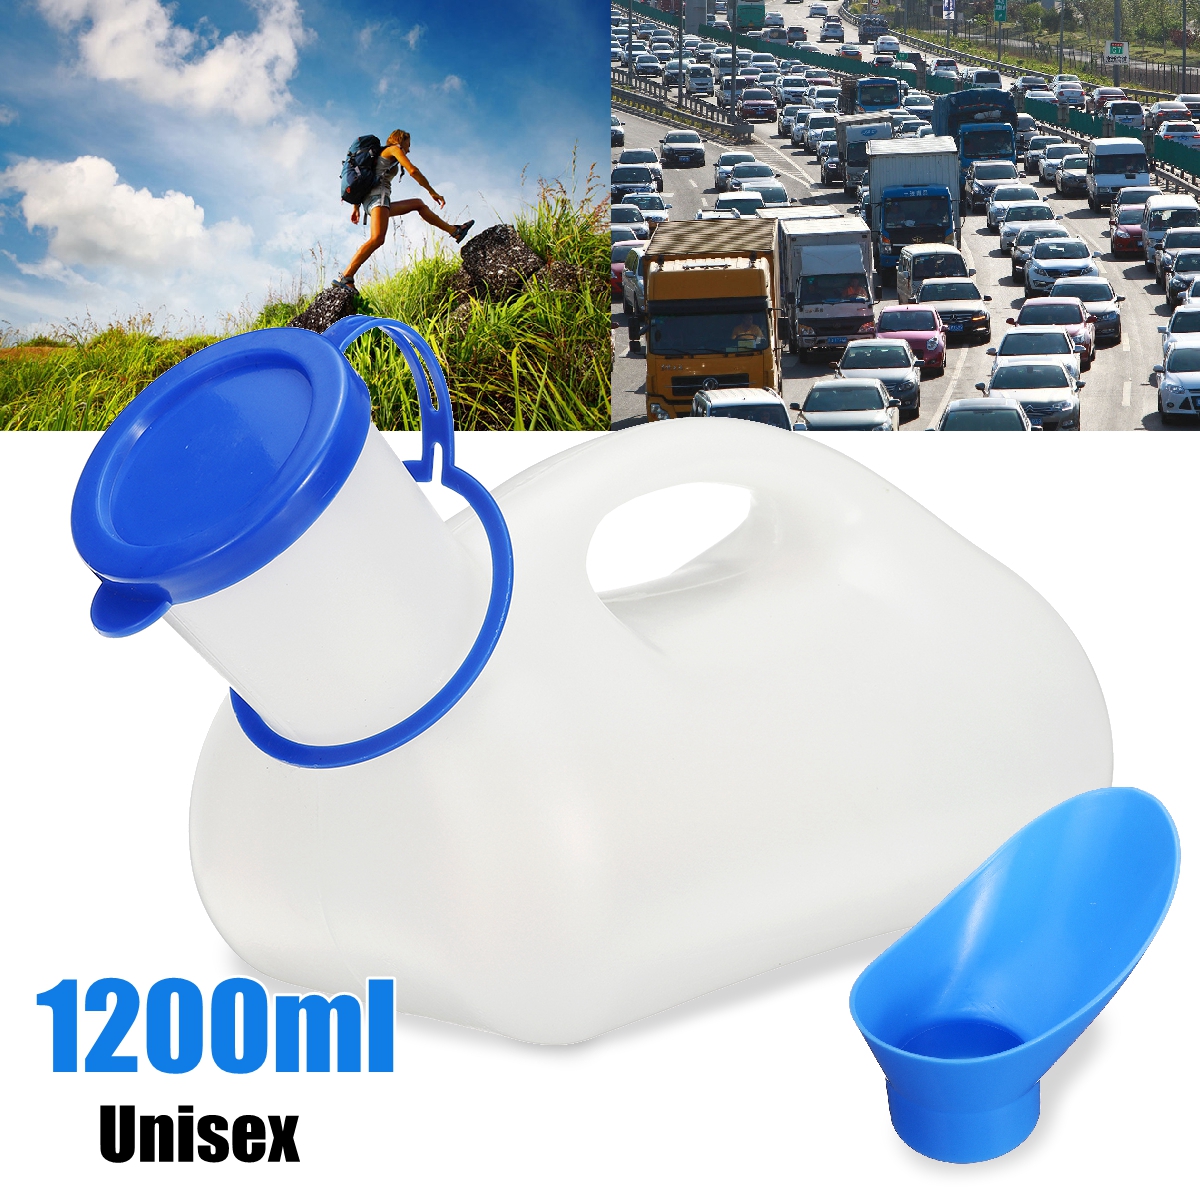 Nowornever Portable Mobile Male Female Urinal Practical Urine Bottle Mobile Toilet Car Journey Travel Camping Handle Urine Bottle with Lid Urination Pot - image 1 of 10